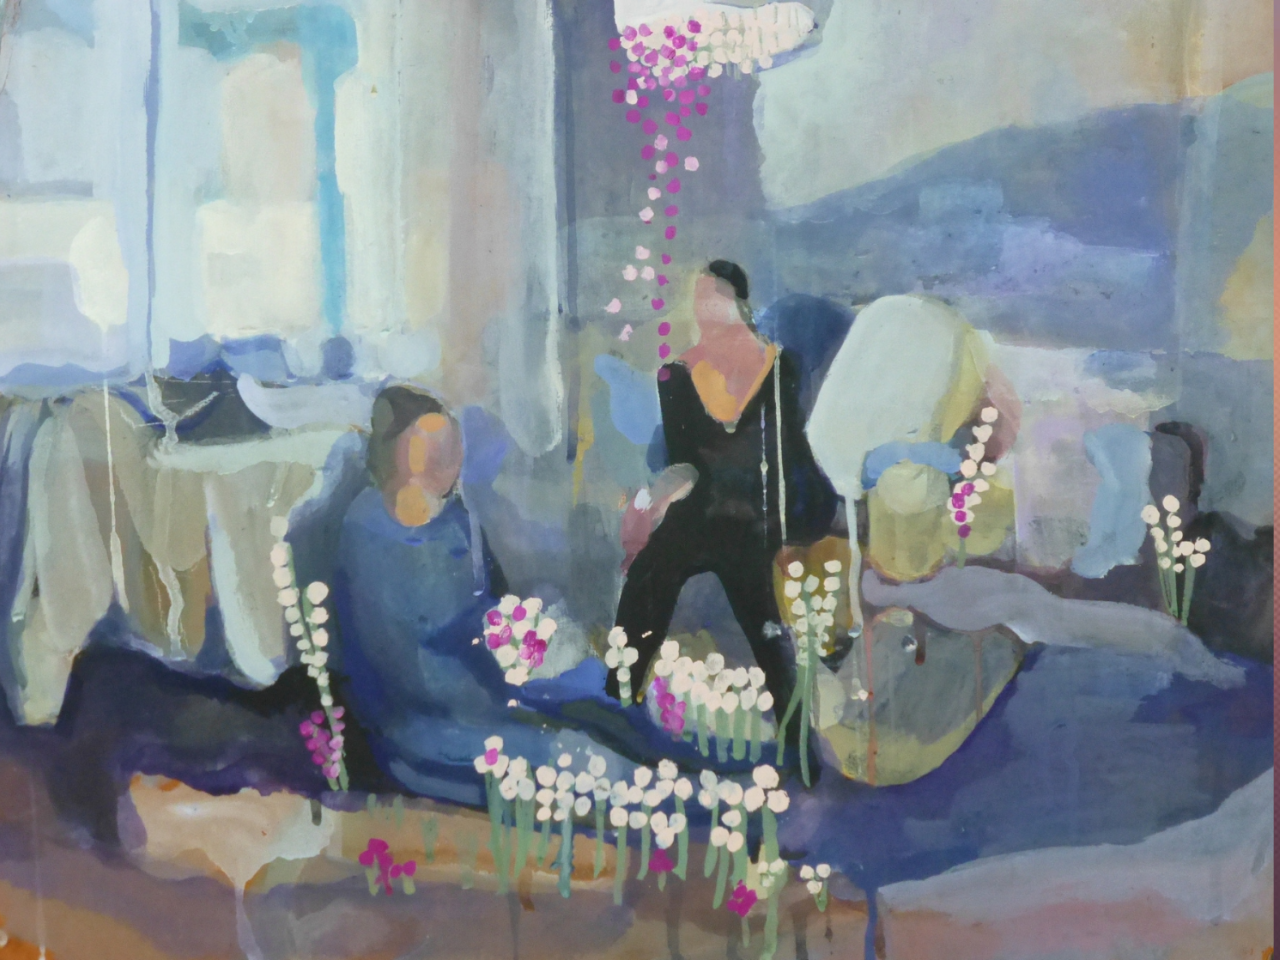 A watercolor painting of two women sitting in a room.